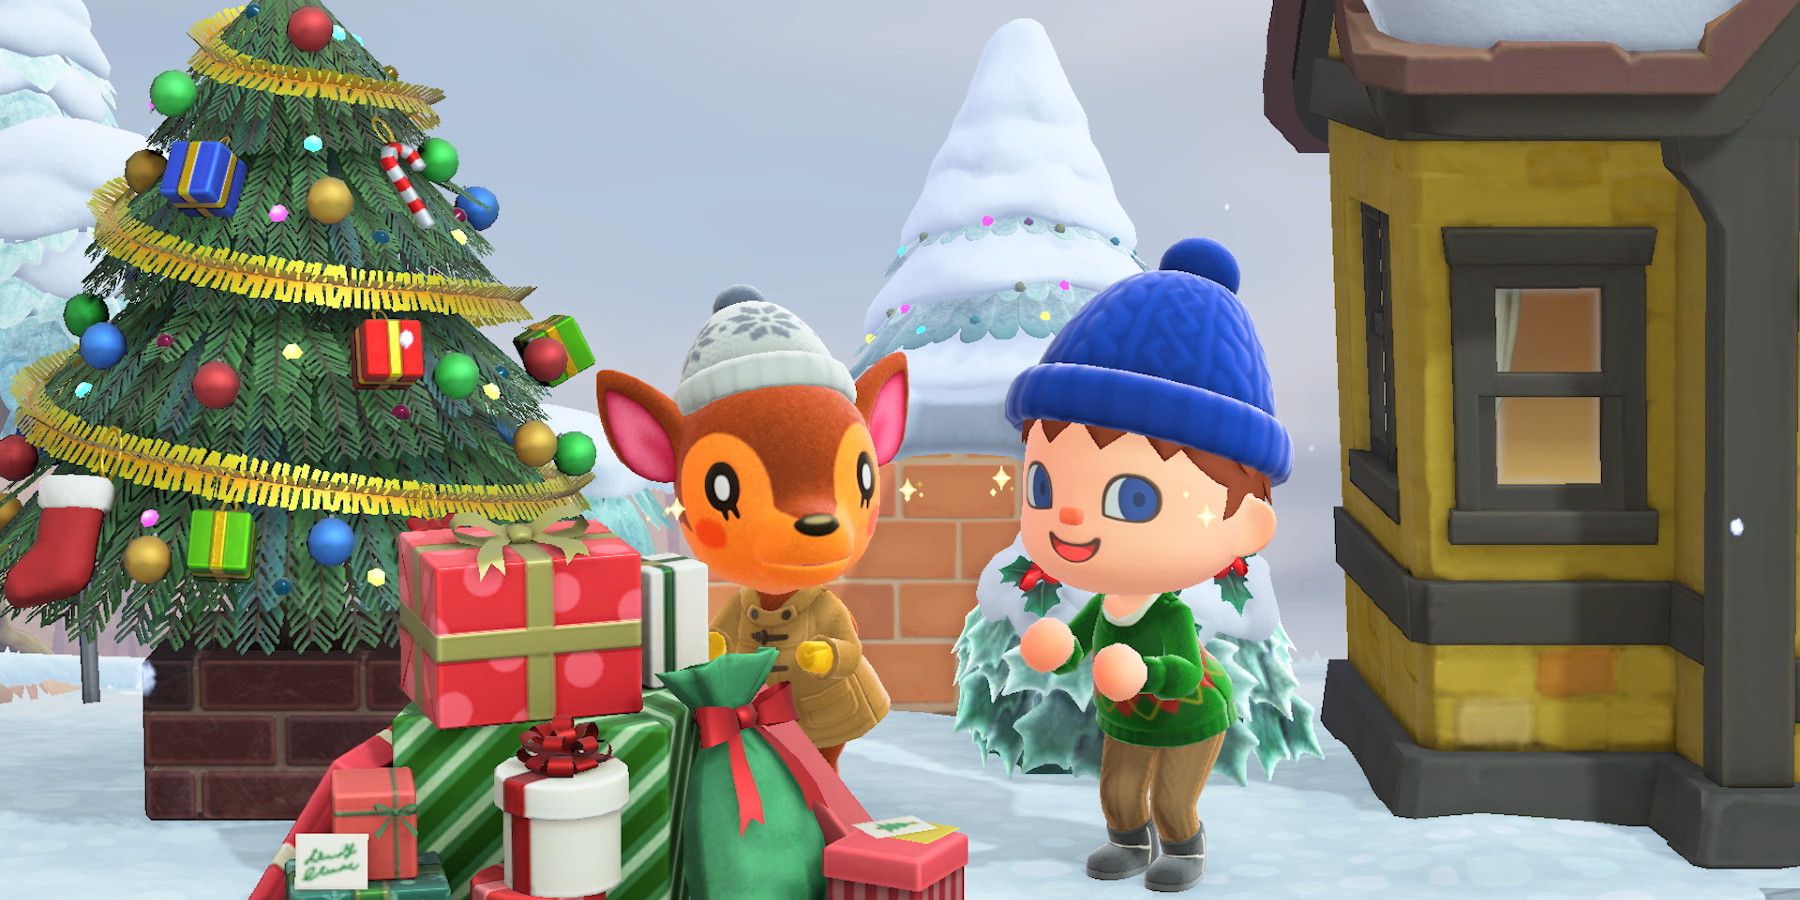 Passionate Animal Crossing Player Covers Their Christmas
Tree in Villager Plushies